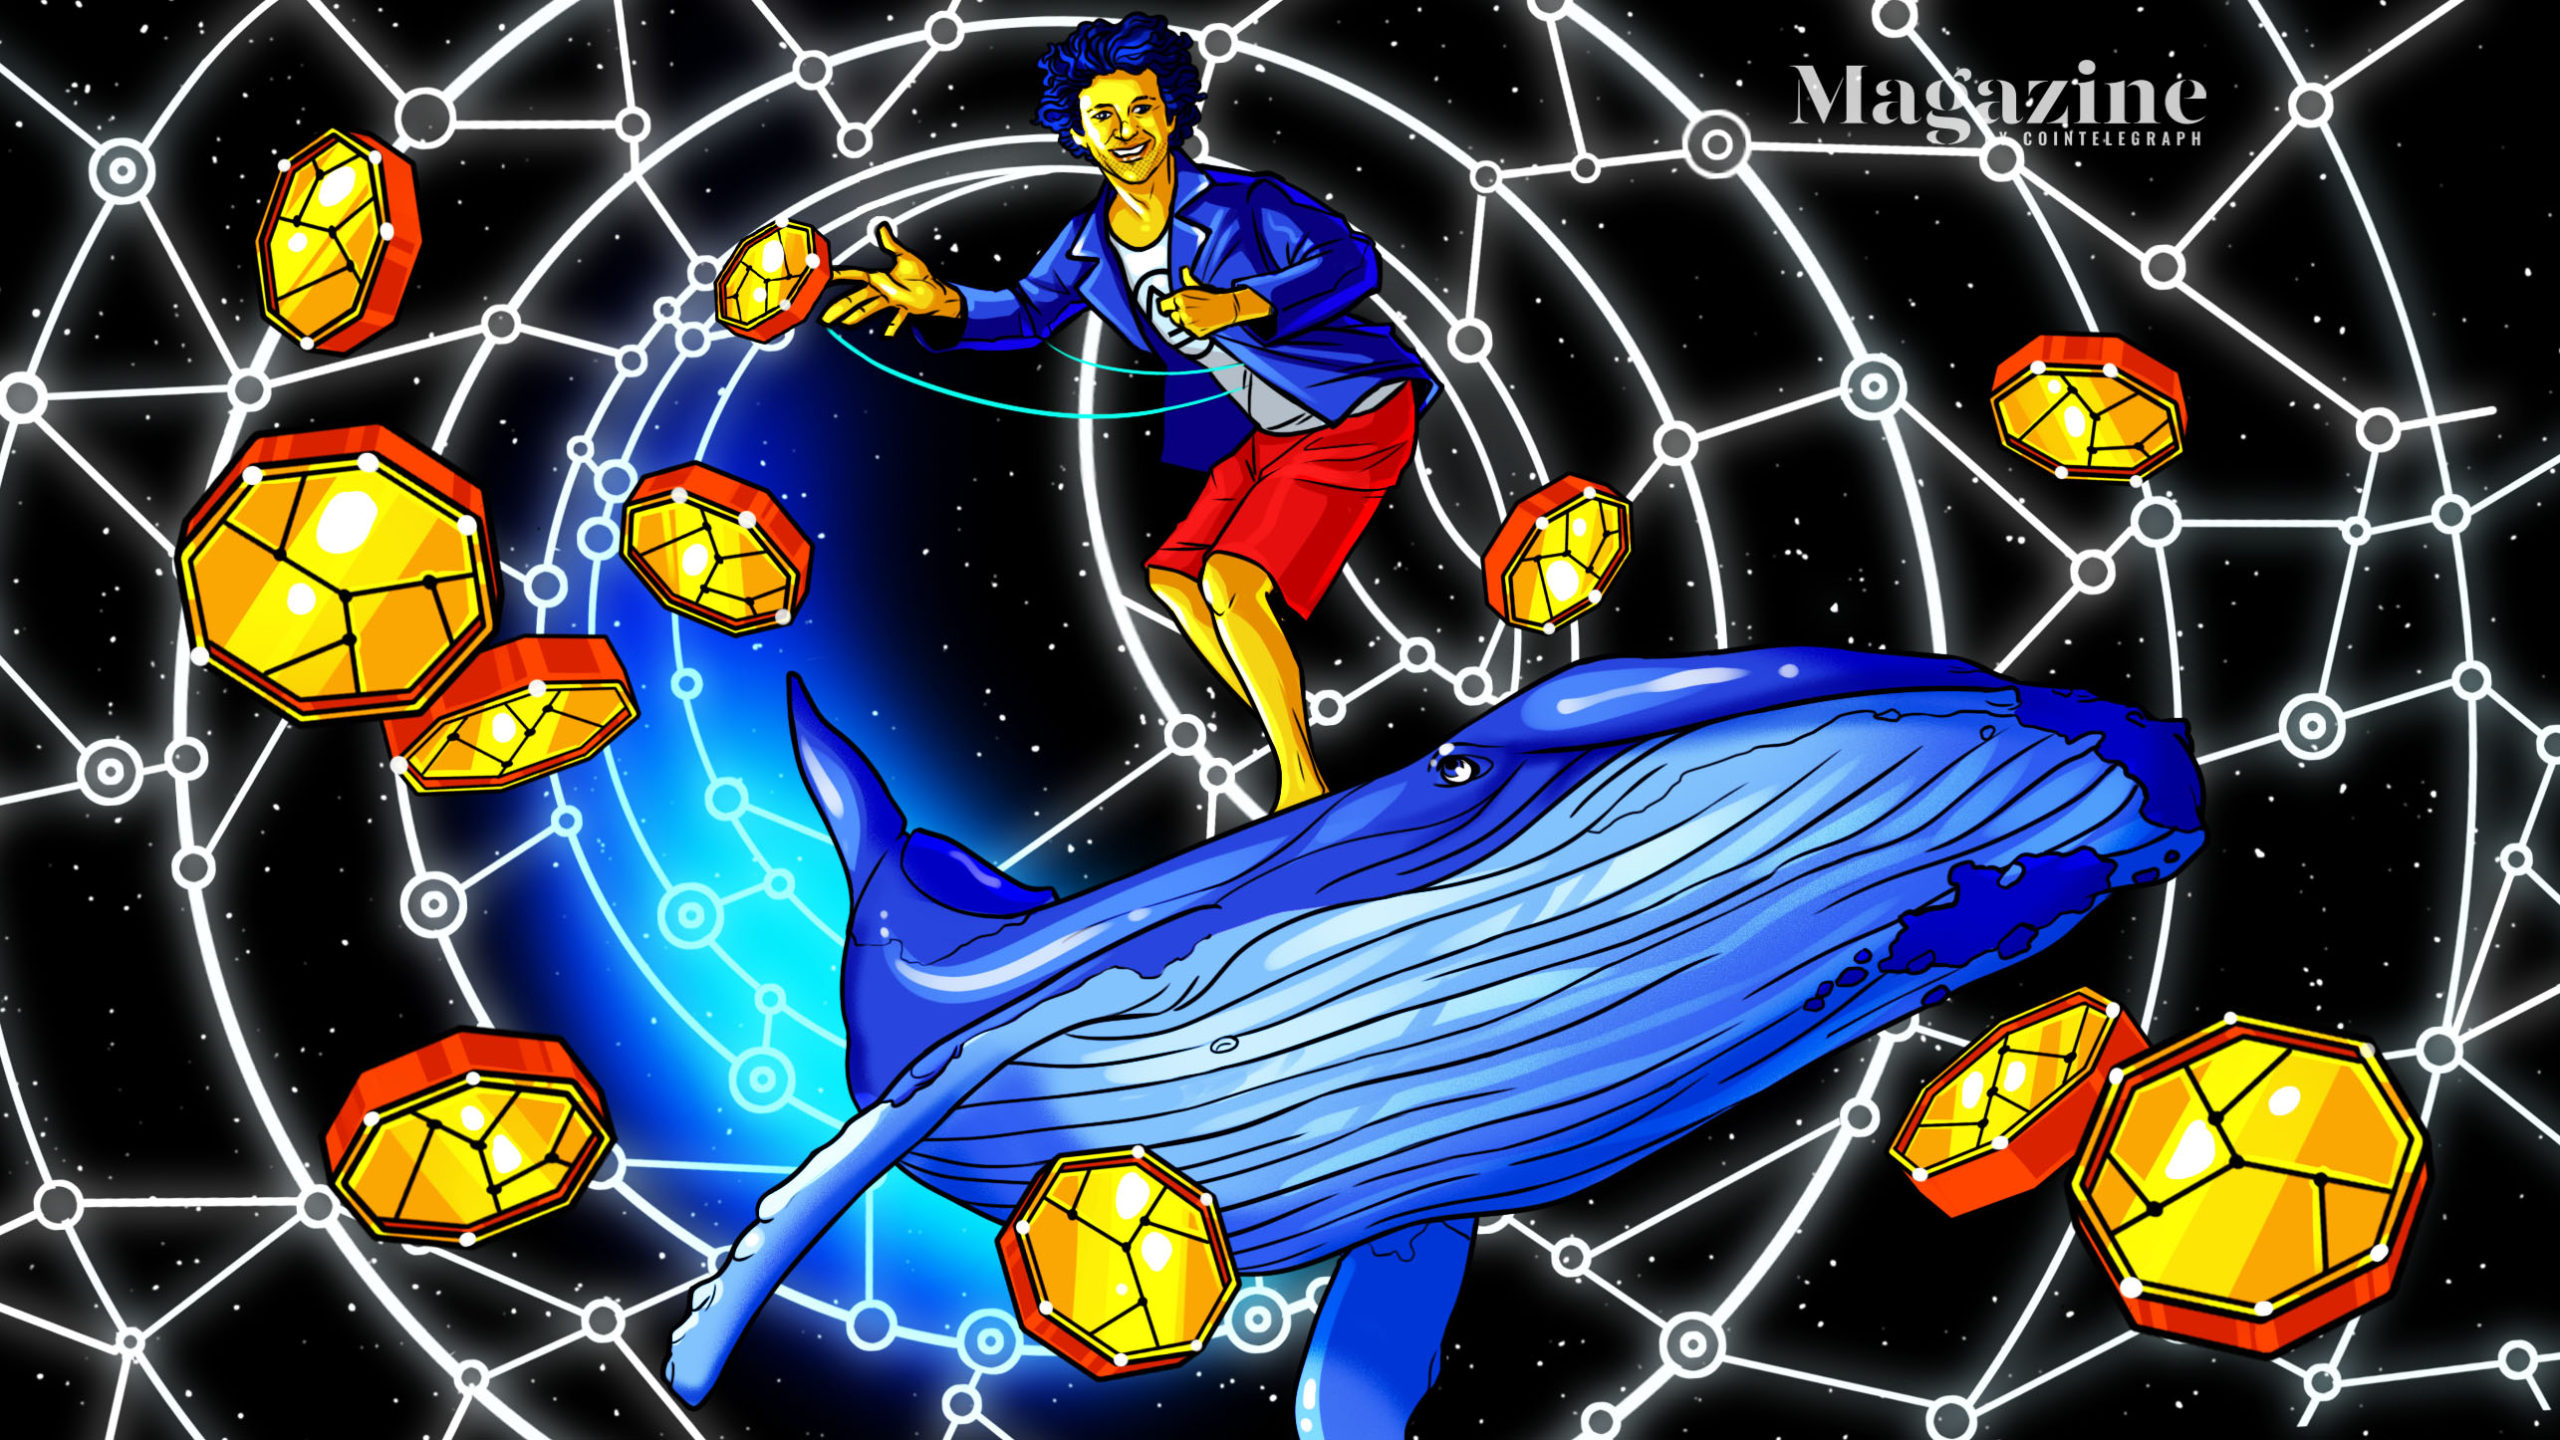 Sam-bankman-fried:-the-crypto-whale-who-wants-to-give-billions-away